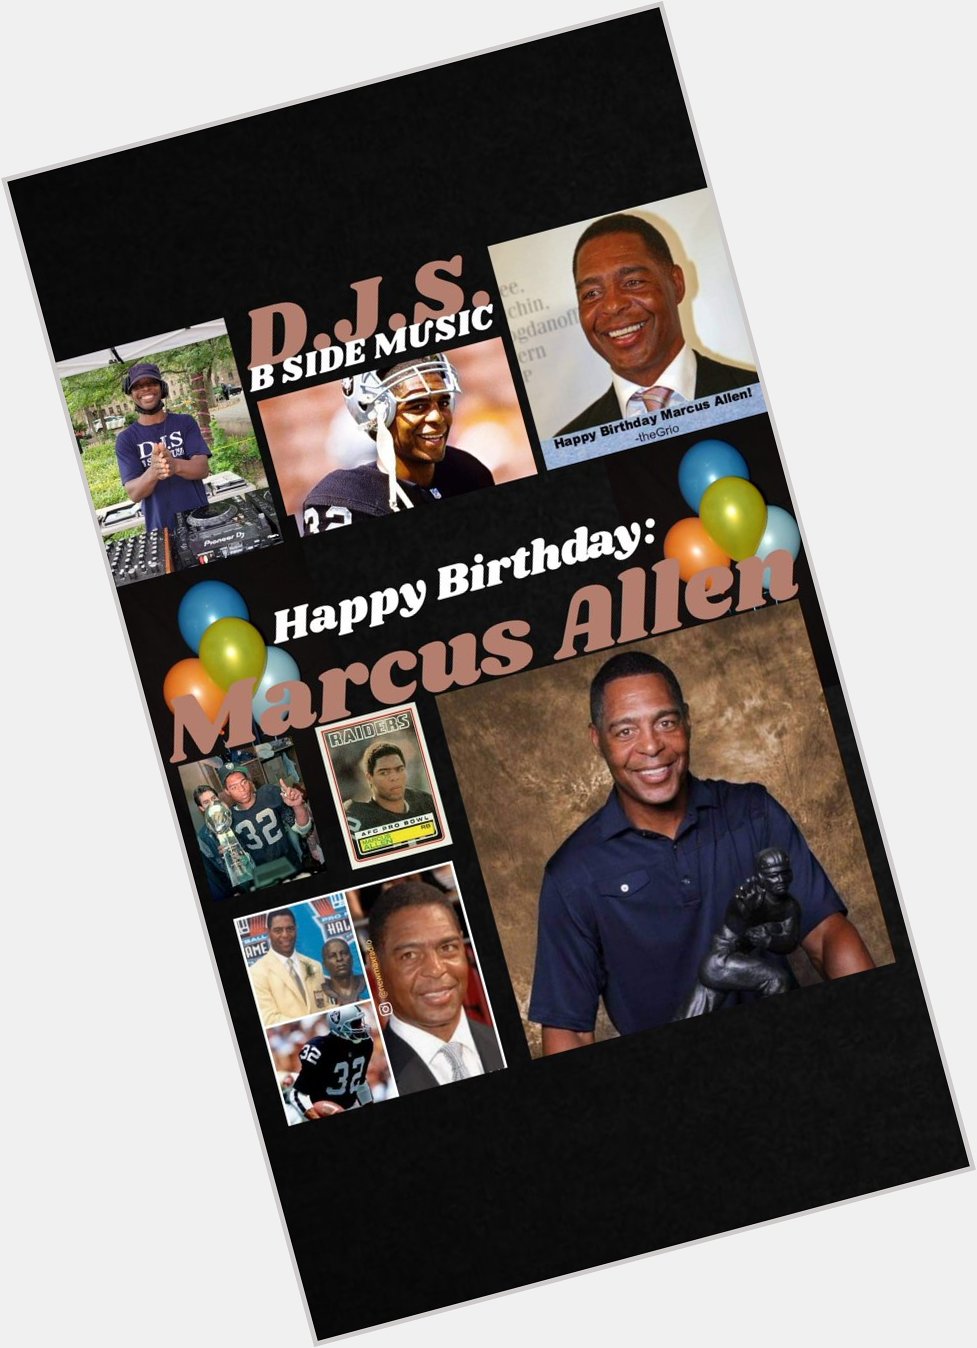 I(D.J.S.)\"B SIDE MUSIC\" saying Happy Birthday to former NFL Football Player: \"MARCUS ALLEN\"!!! 